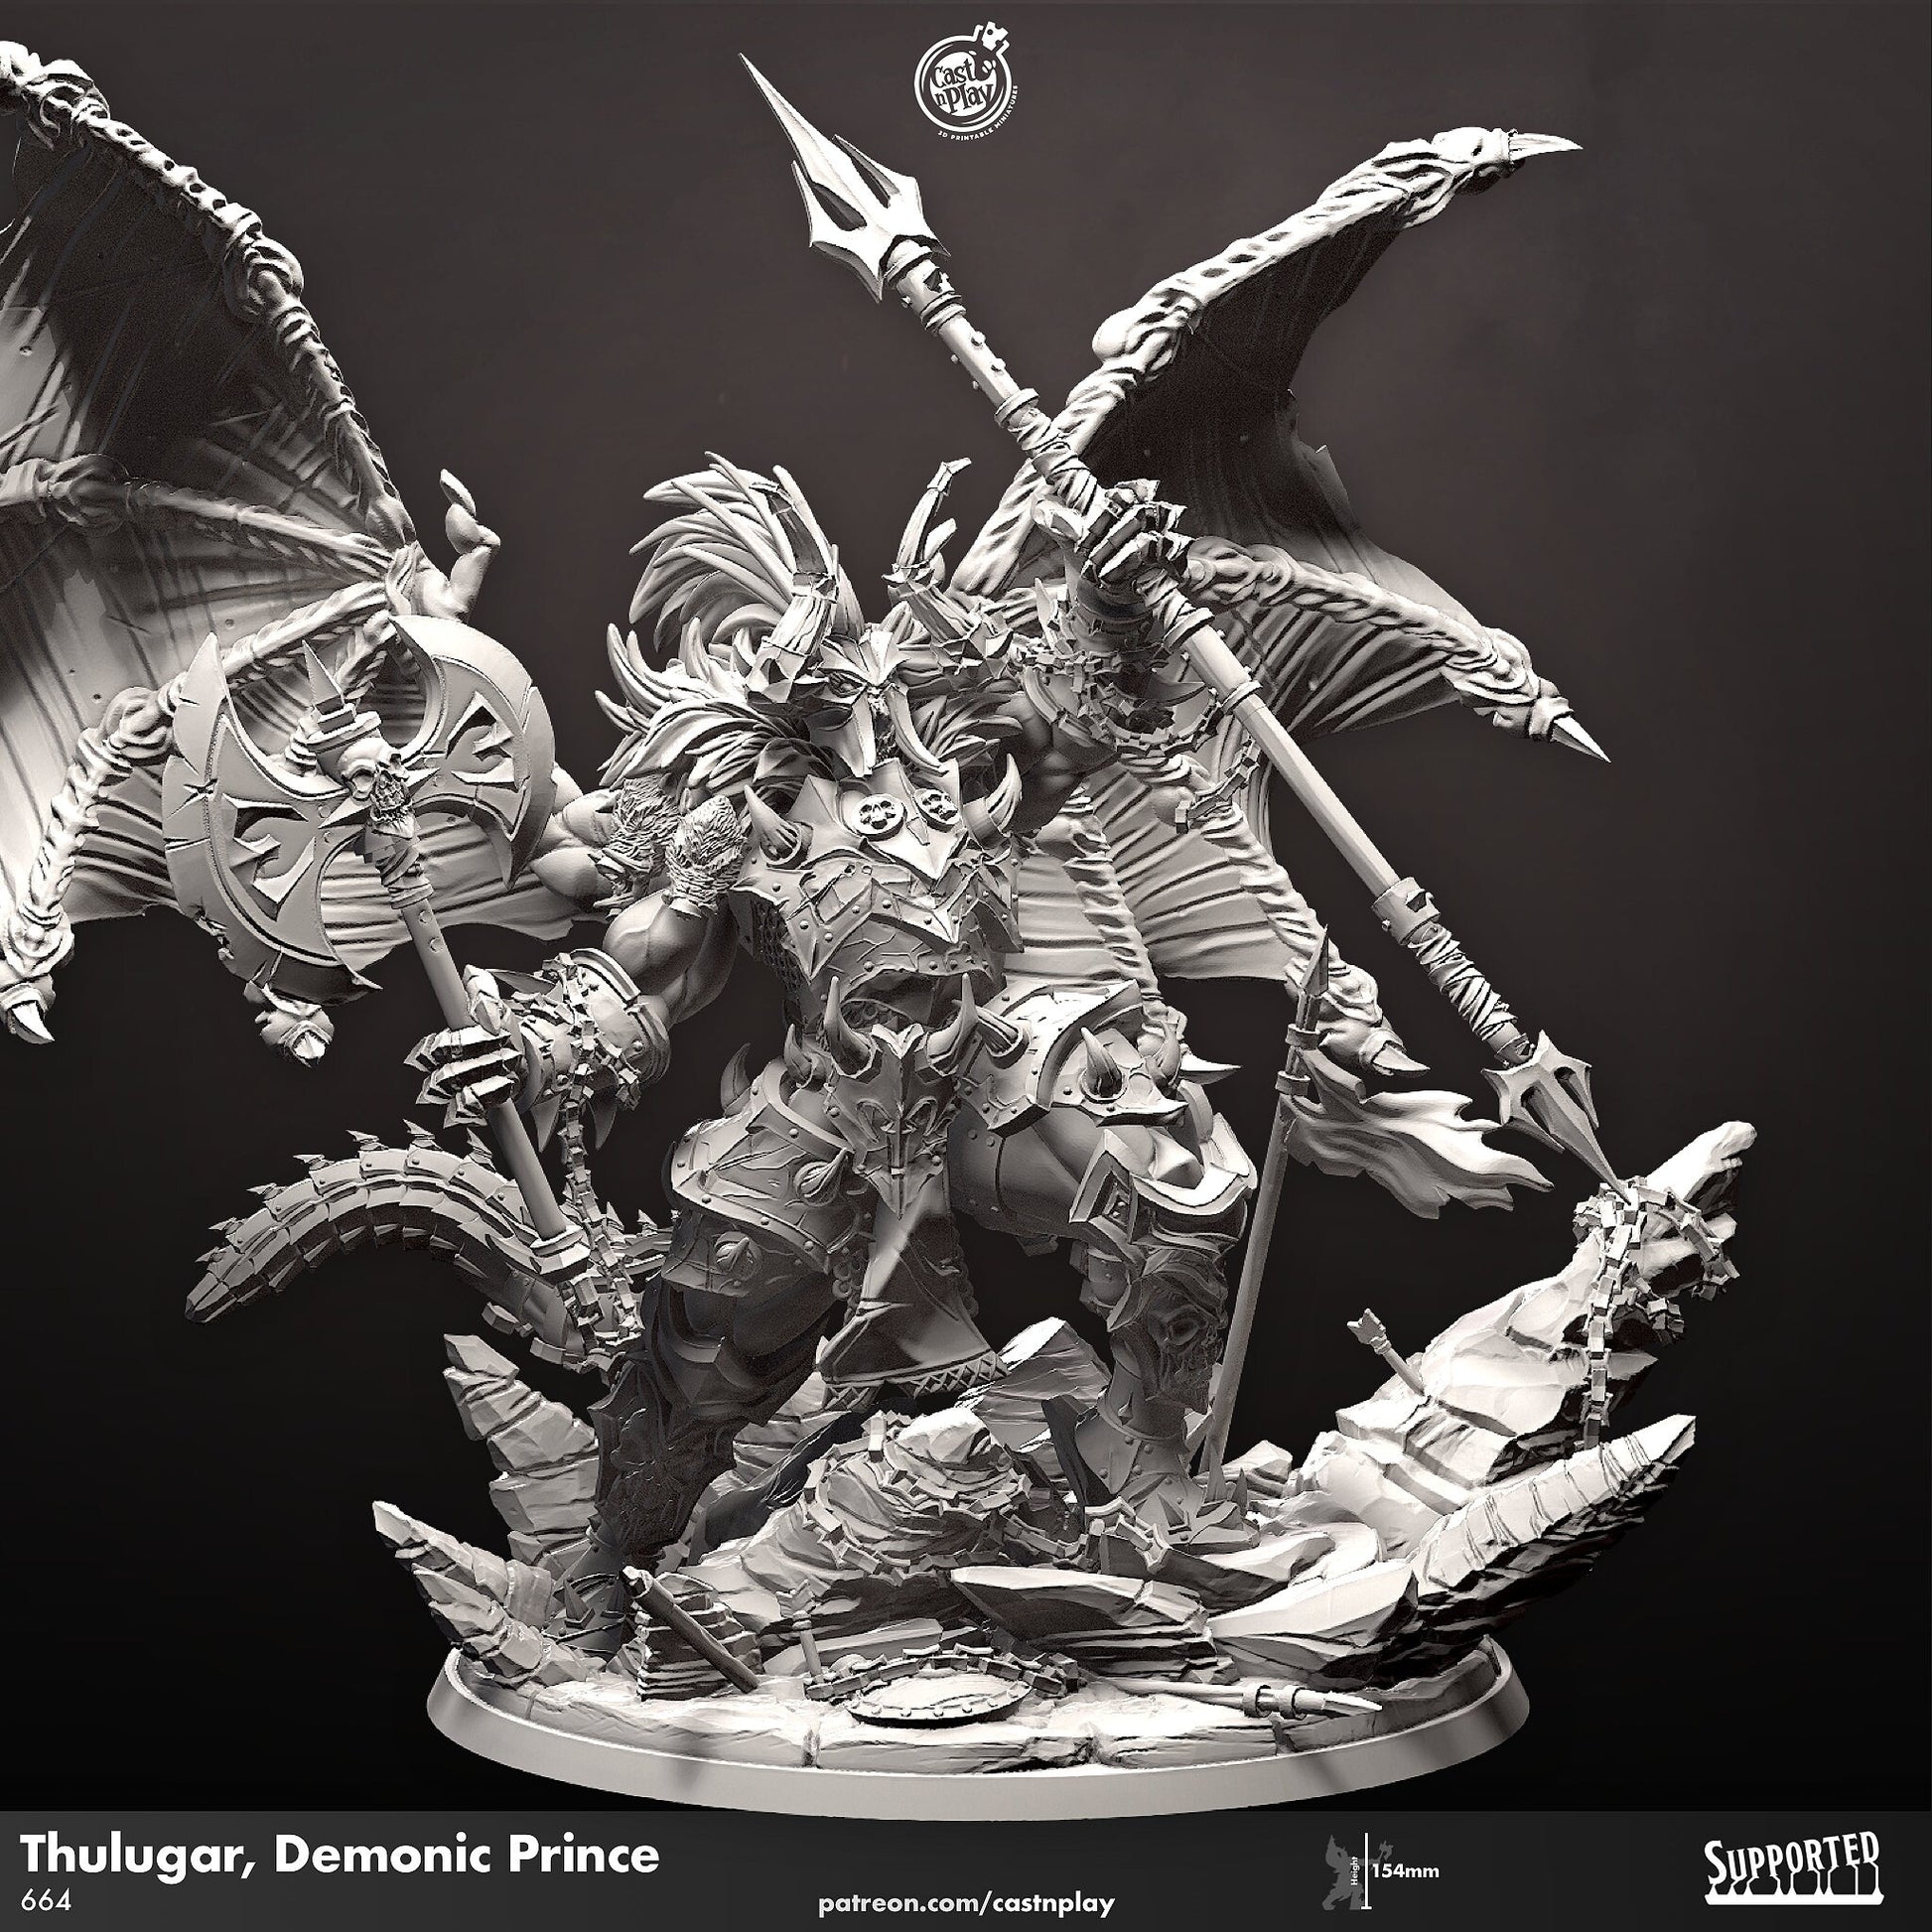 Demon Prince Thulugar | RPG Miniature for Dungeons and Dragons|Pathfinder|Tabletop Wargaming | Demon Miniature | Cast N Play